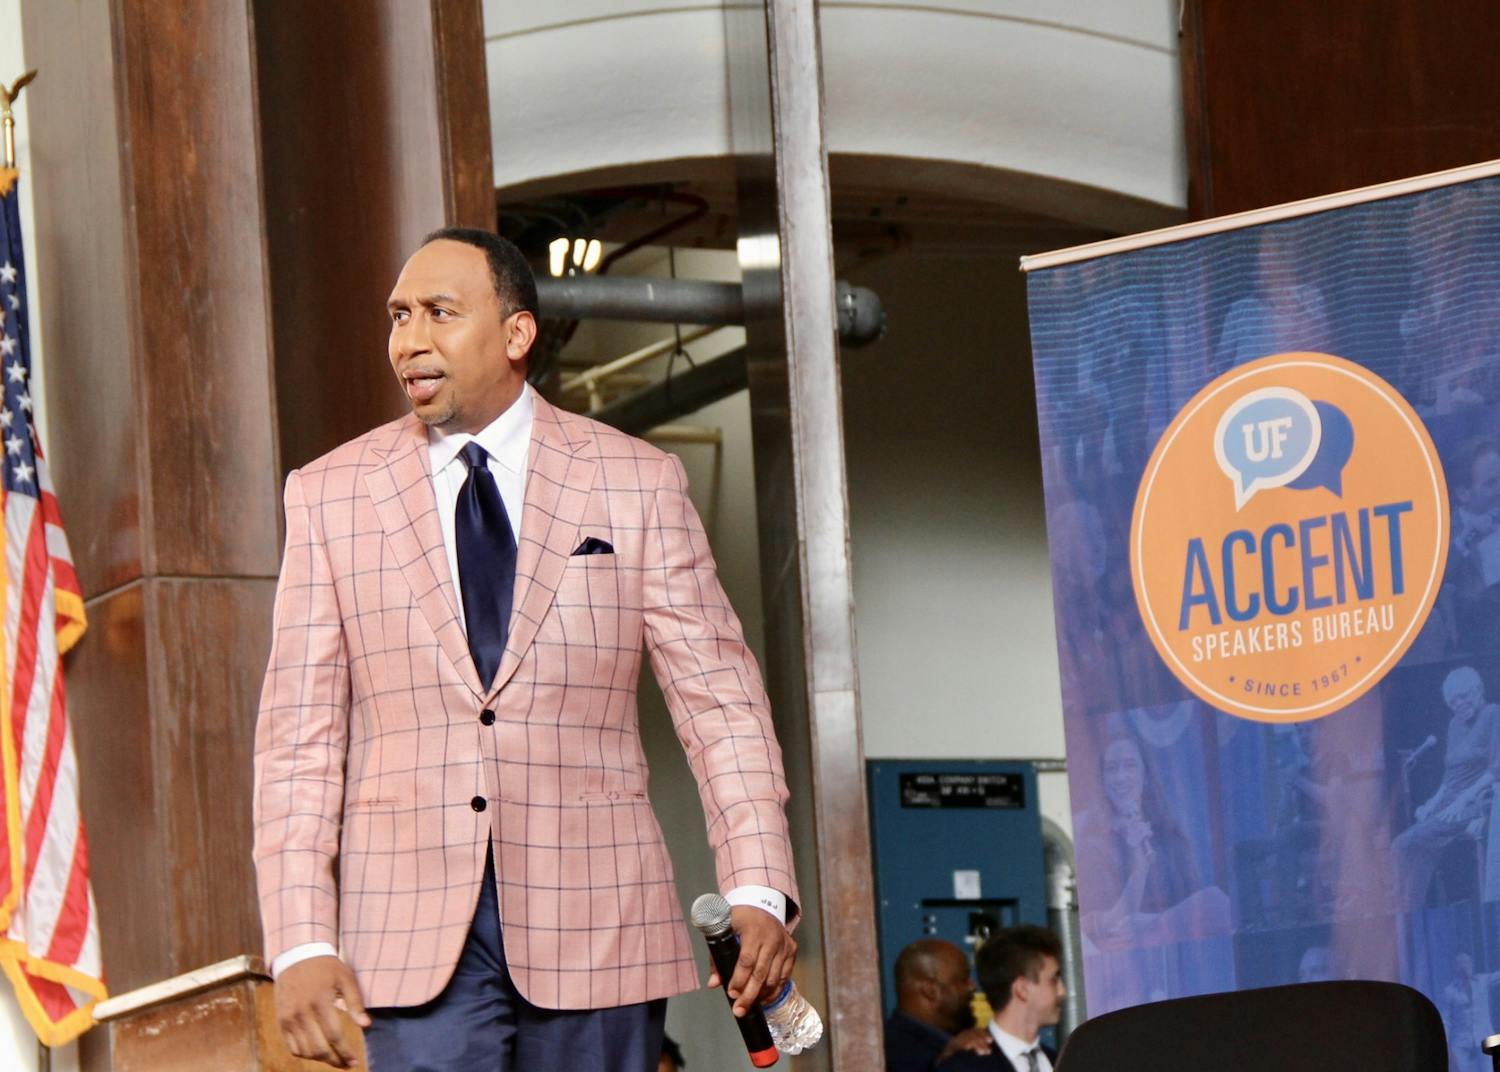 ESPN&#x27;s Stephen A. Smith walks across the stage at the University Auditorium Wednesday, July 27, 2022.